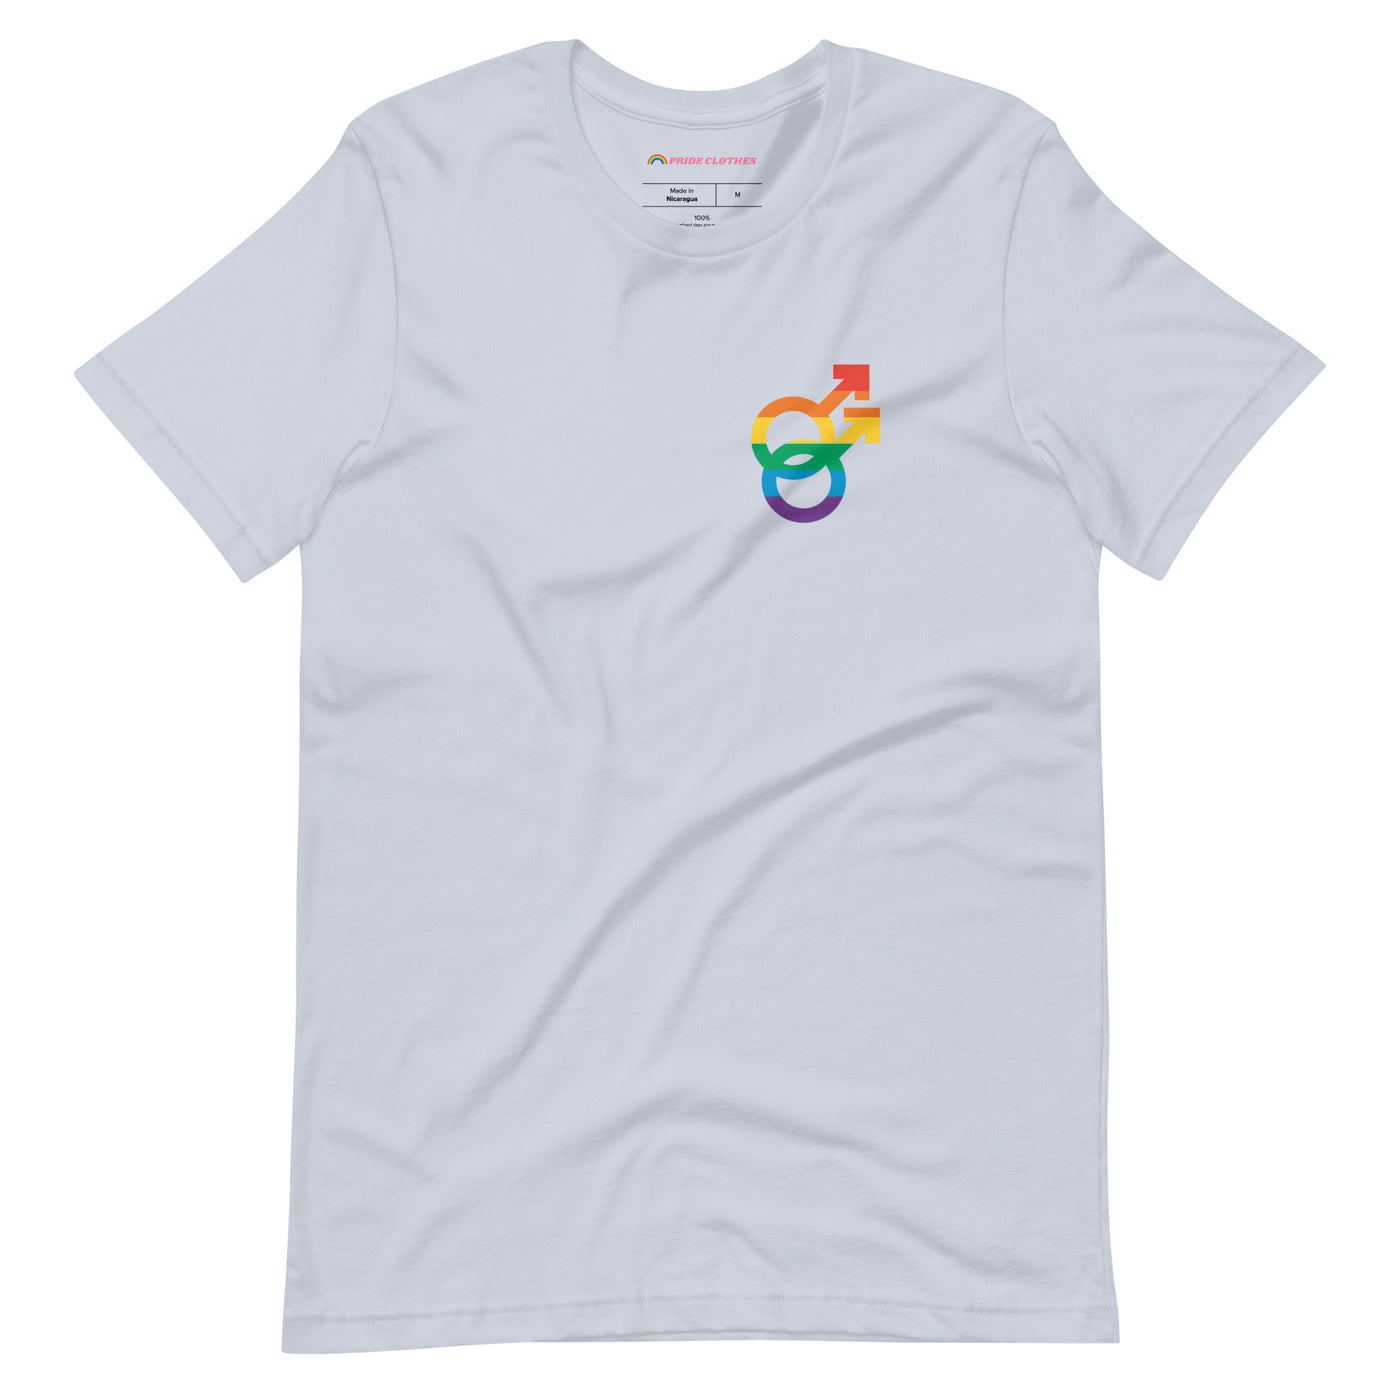 Pride Clothes - Fearlessly Express Your Truth Gay Gender Pride T-Shirt - Light Blue